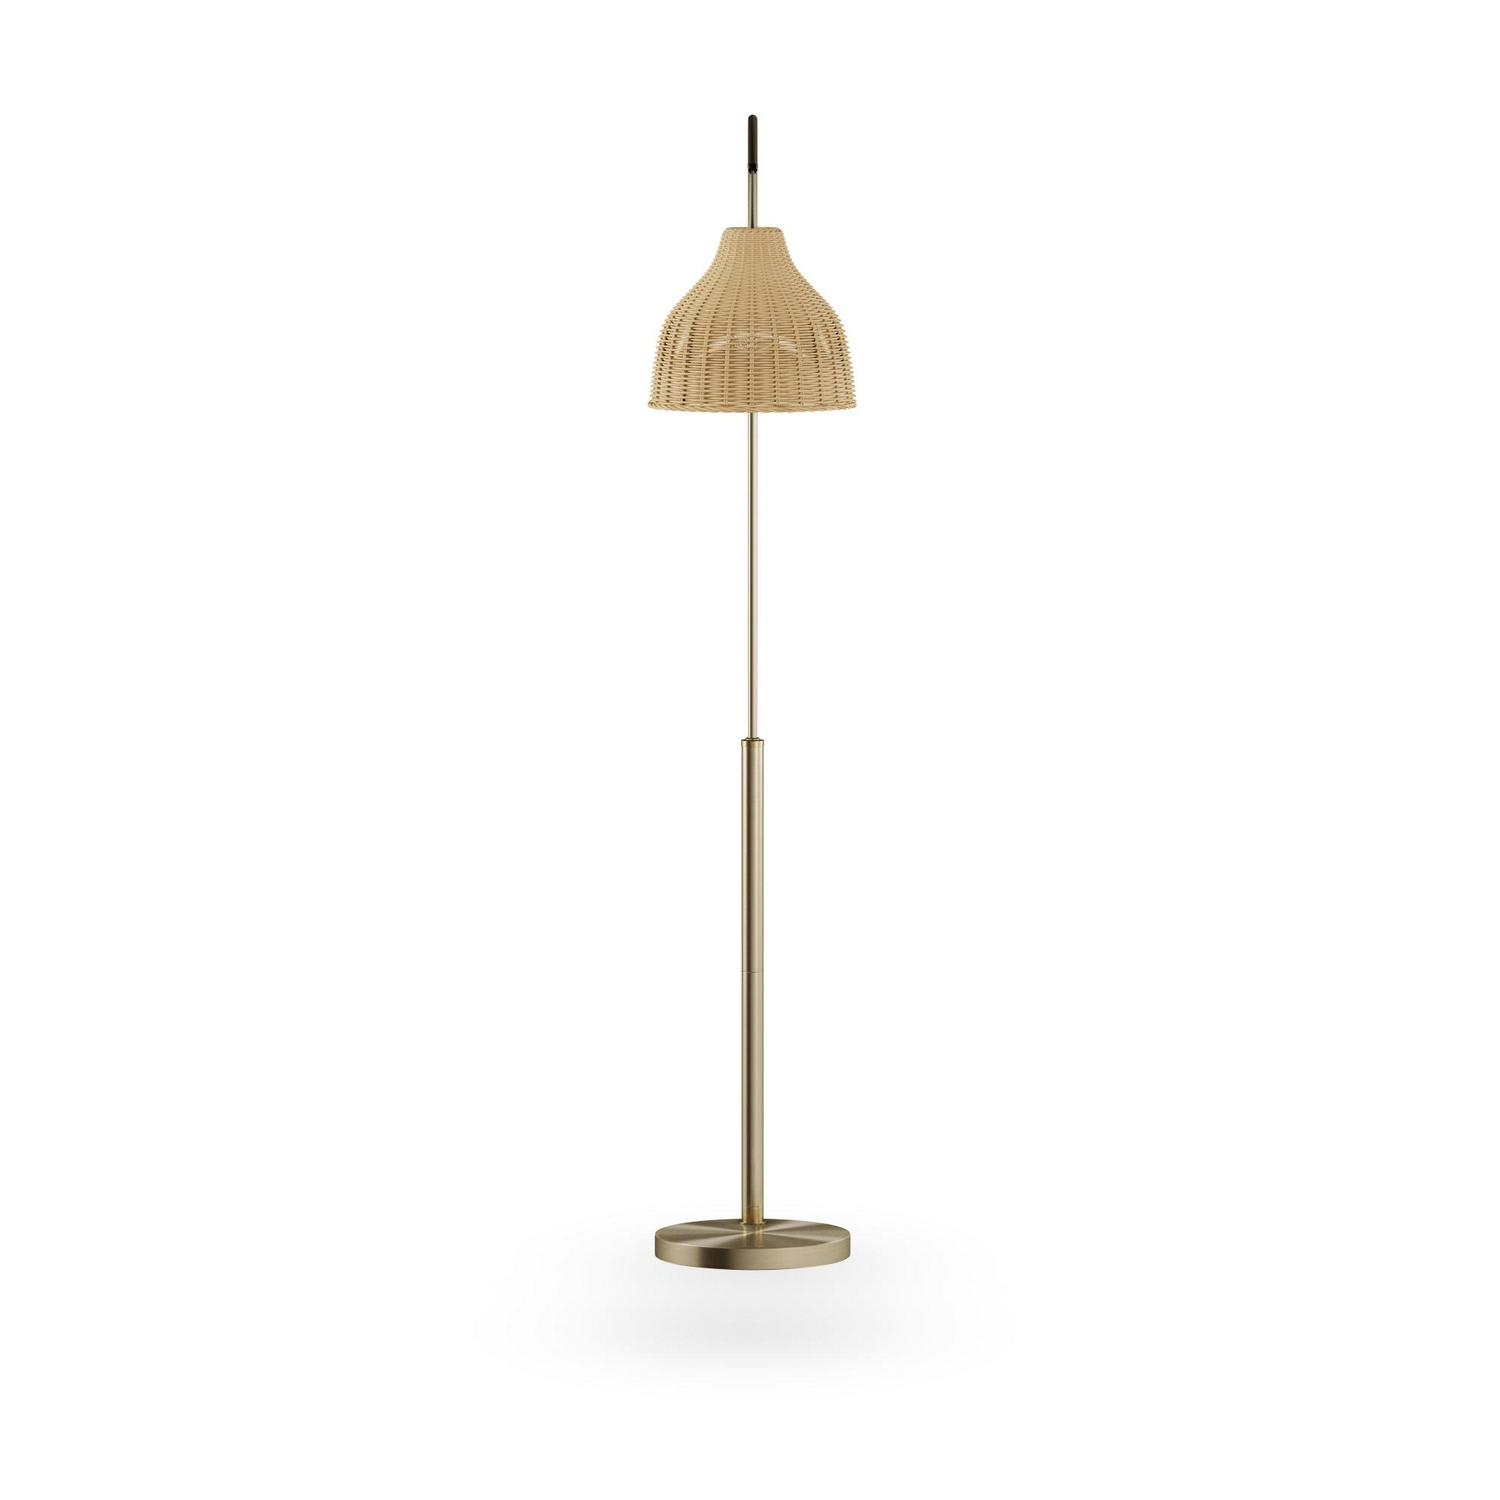 Arch Floor Lamp with Rattan Shade by Drew Barrymore Flower Home， Antique Brass